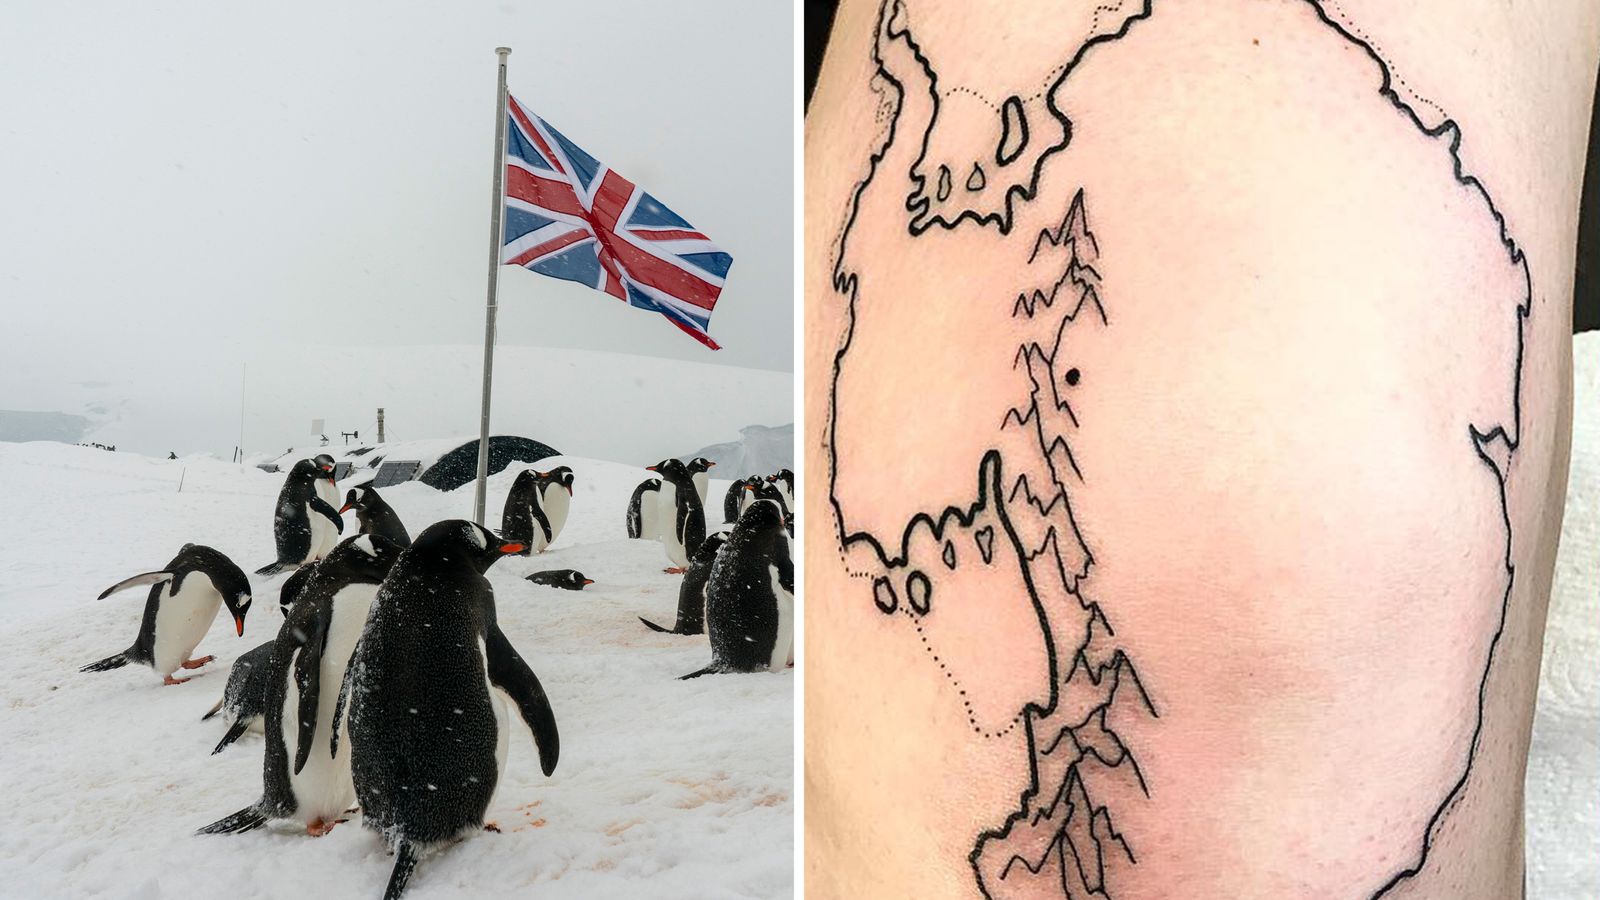 Applications open for Antarctica's penguin post office with one applicant using tattoos to show her enthusiasm